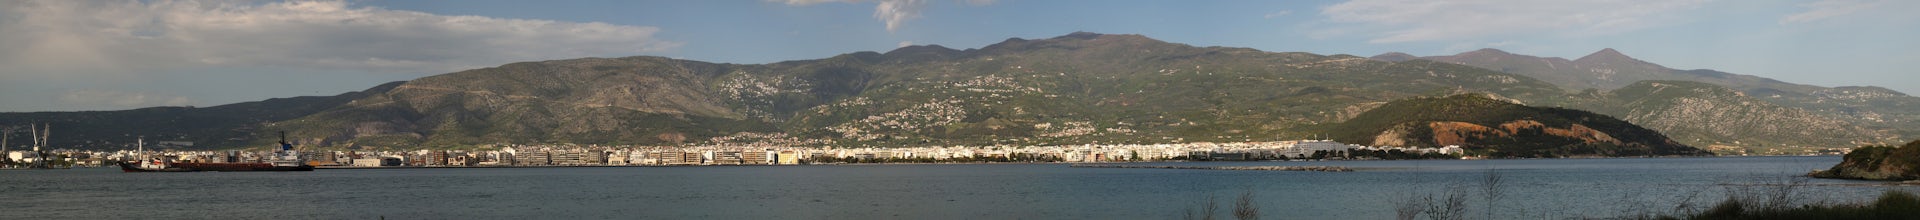 The Waterfront of Volos (Iolcus)